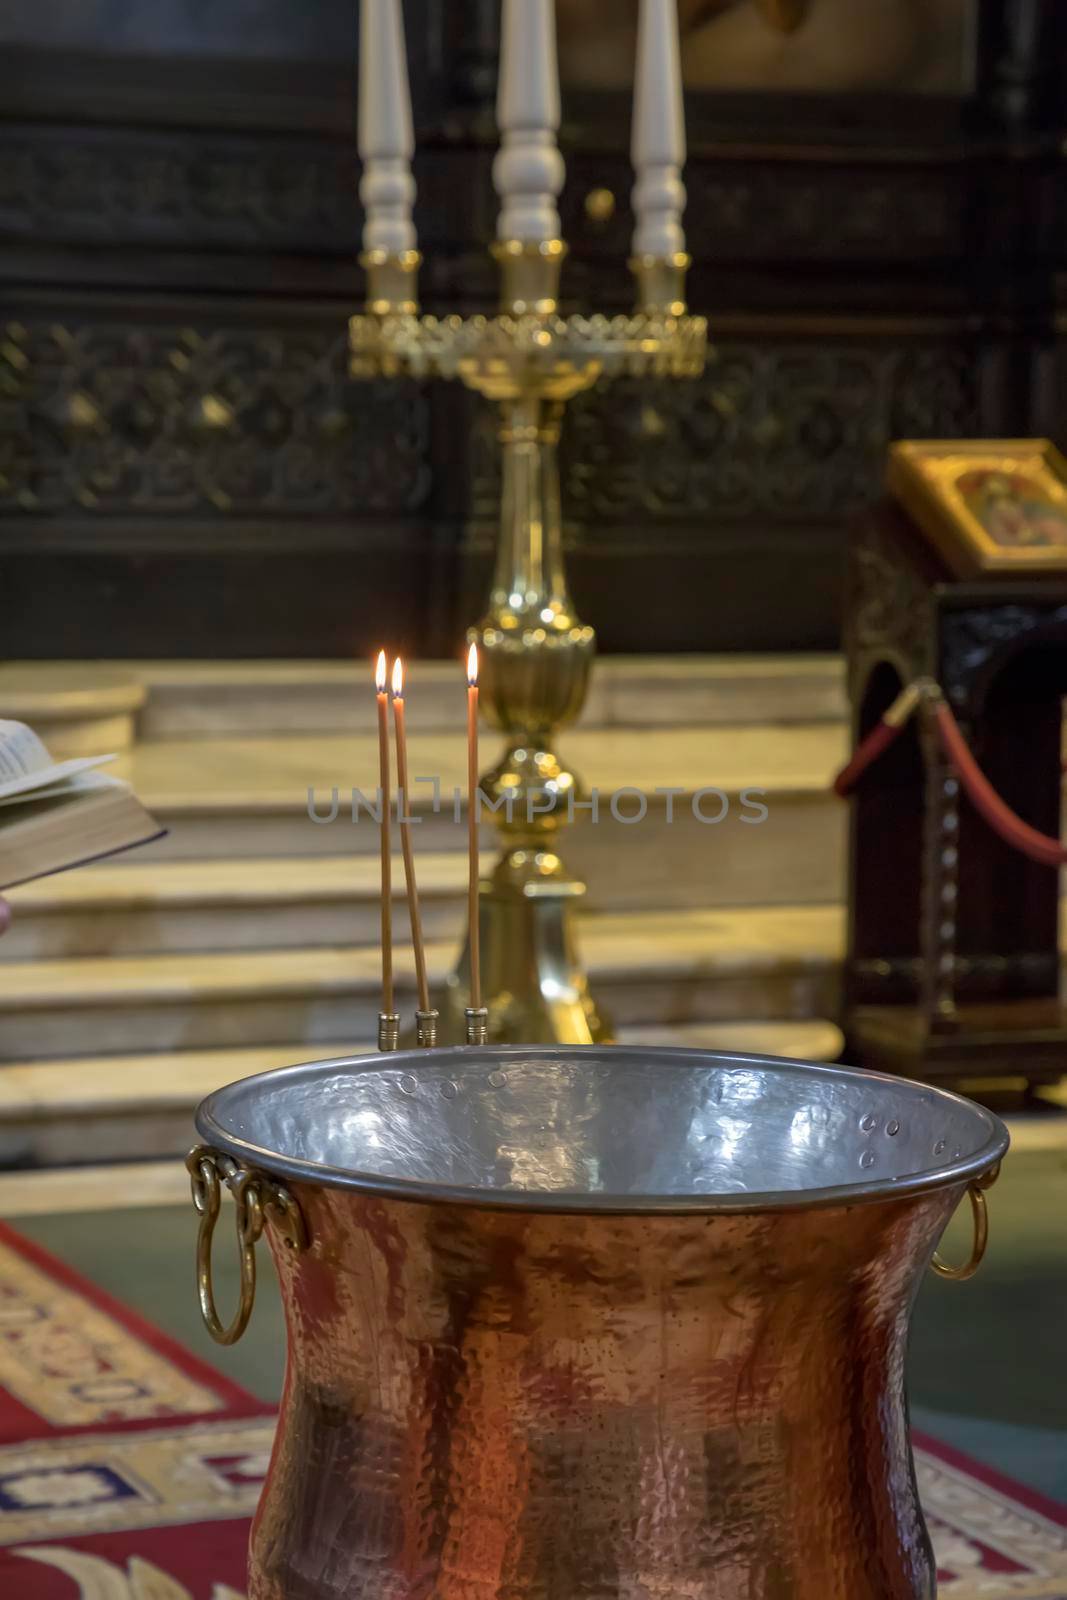 Christening in the church. Church utensils in the Orthodox church. A big bowl of water for the baptism of a baby with wax candles.